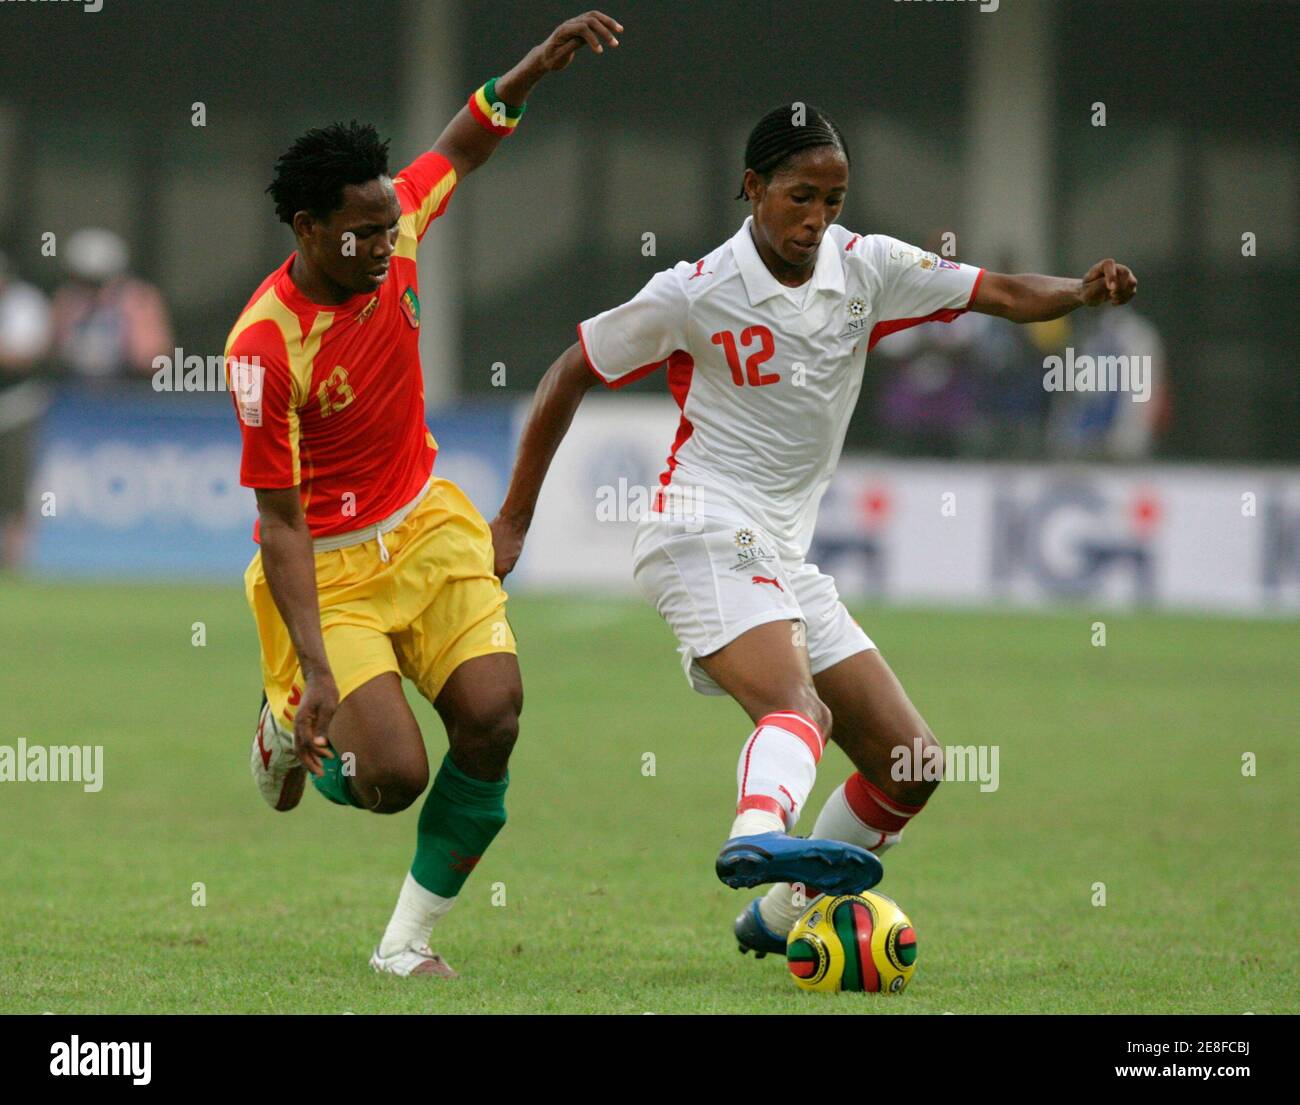 Guinea's Mohamed Sacko (L) fights for the ball with Namibia's Muna Katupose during their African Nations Cup Group A soccer match in Sekondi January 28, 2008.  REUTERS/Siphiwe Sibeko (GHANA) Stock Photo